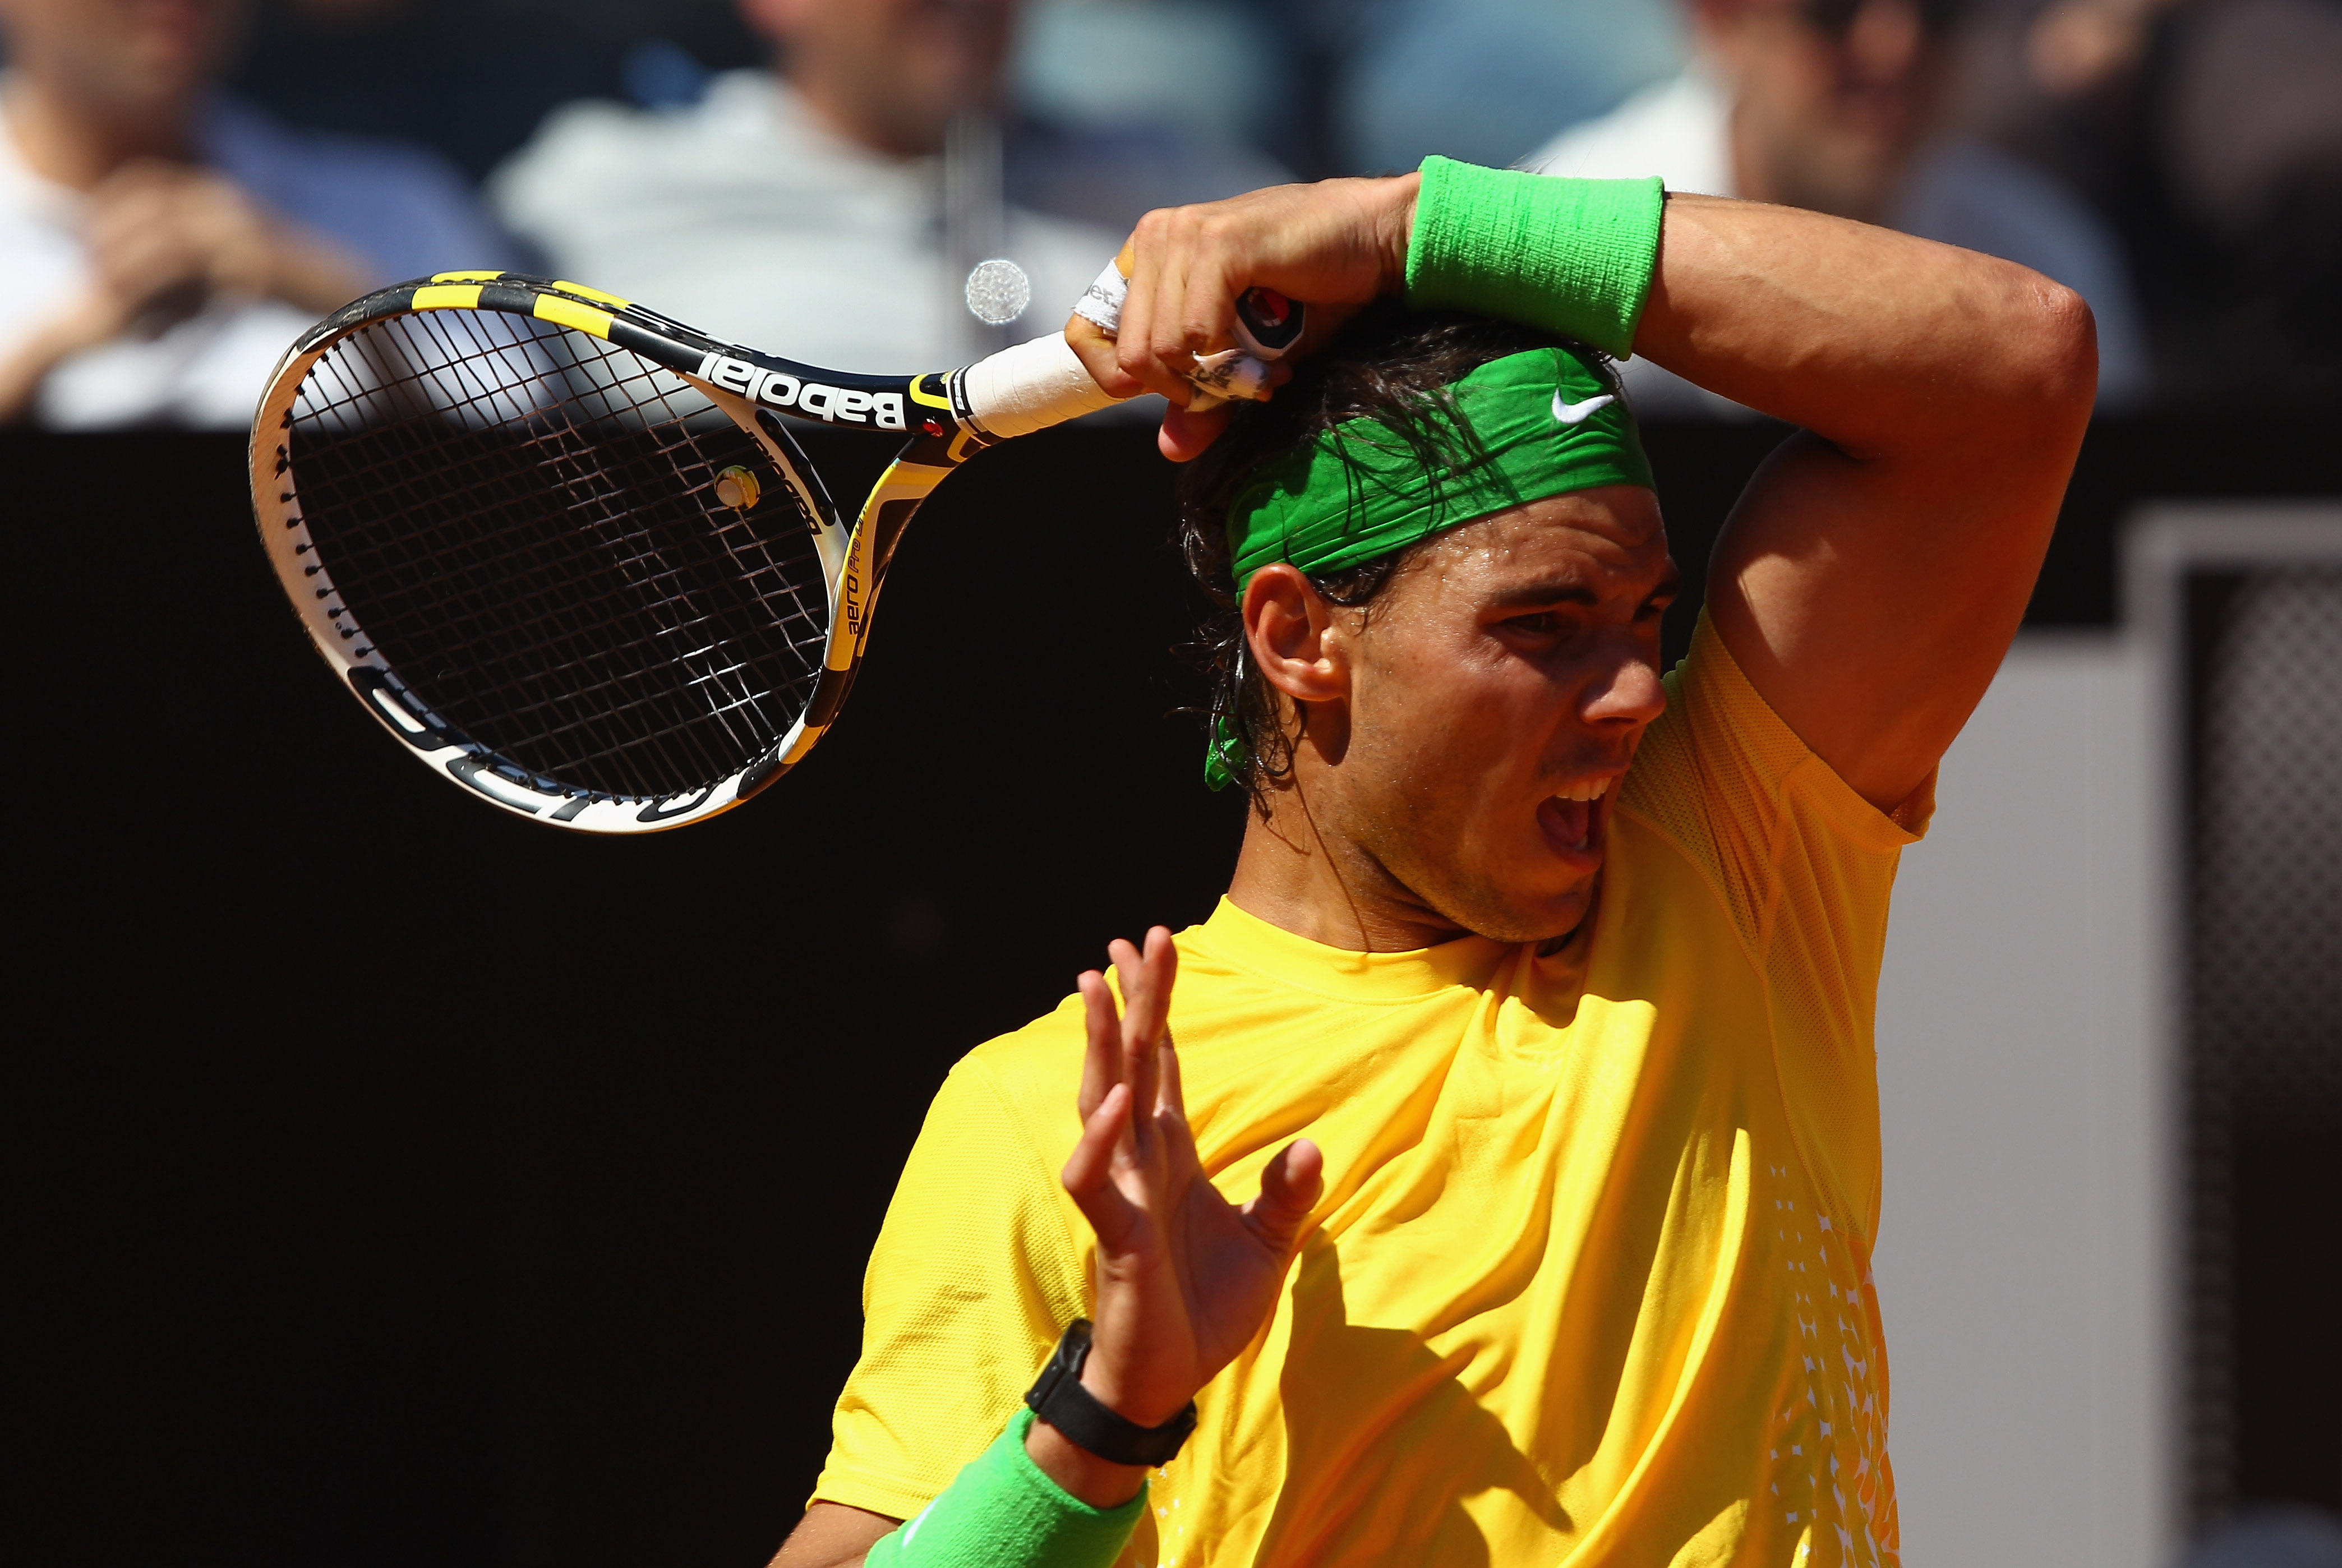 ROME, ITALY - MAY 14:  Rafael Nadal of Spain in action during his semi final match against Richard Gasquet of France during day seven of the Internazoinali BNL D'Italia at the Foro Italico Tennis Centre  on May 14, 2011 in Rome, Italy.  (Photo by Clive Br